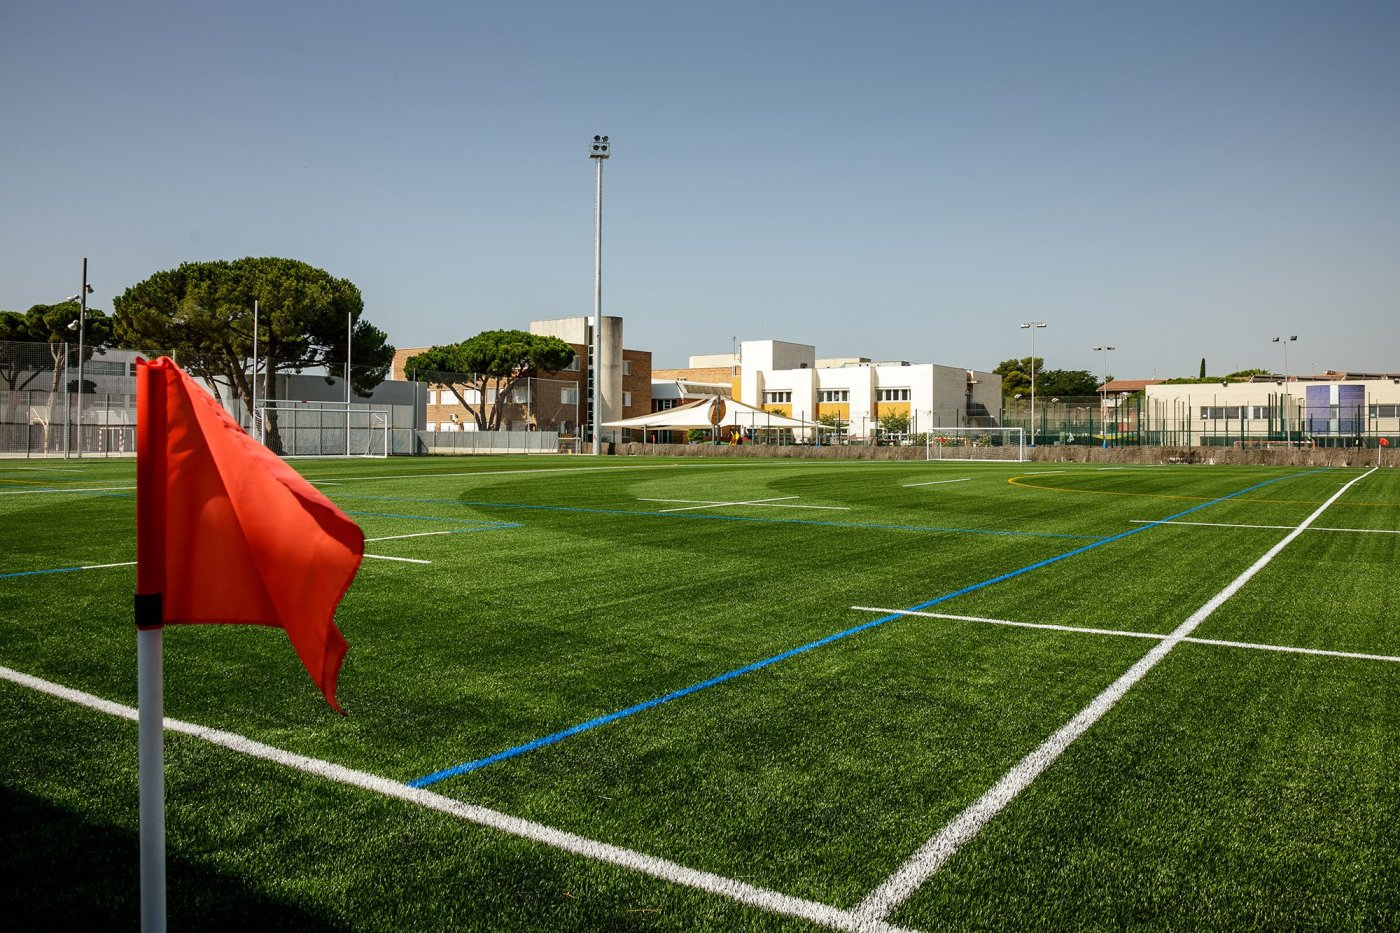 bsb-rugby-football-sports-stadium-castelldefels (5)